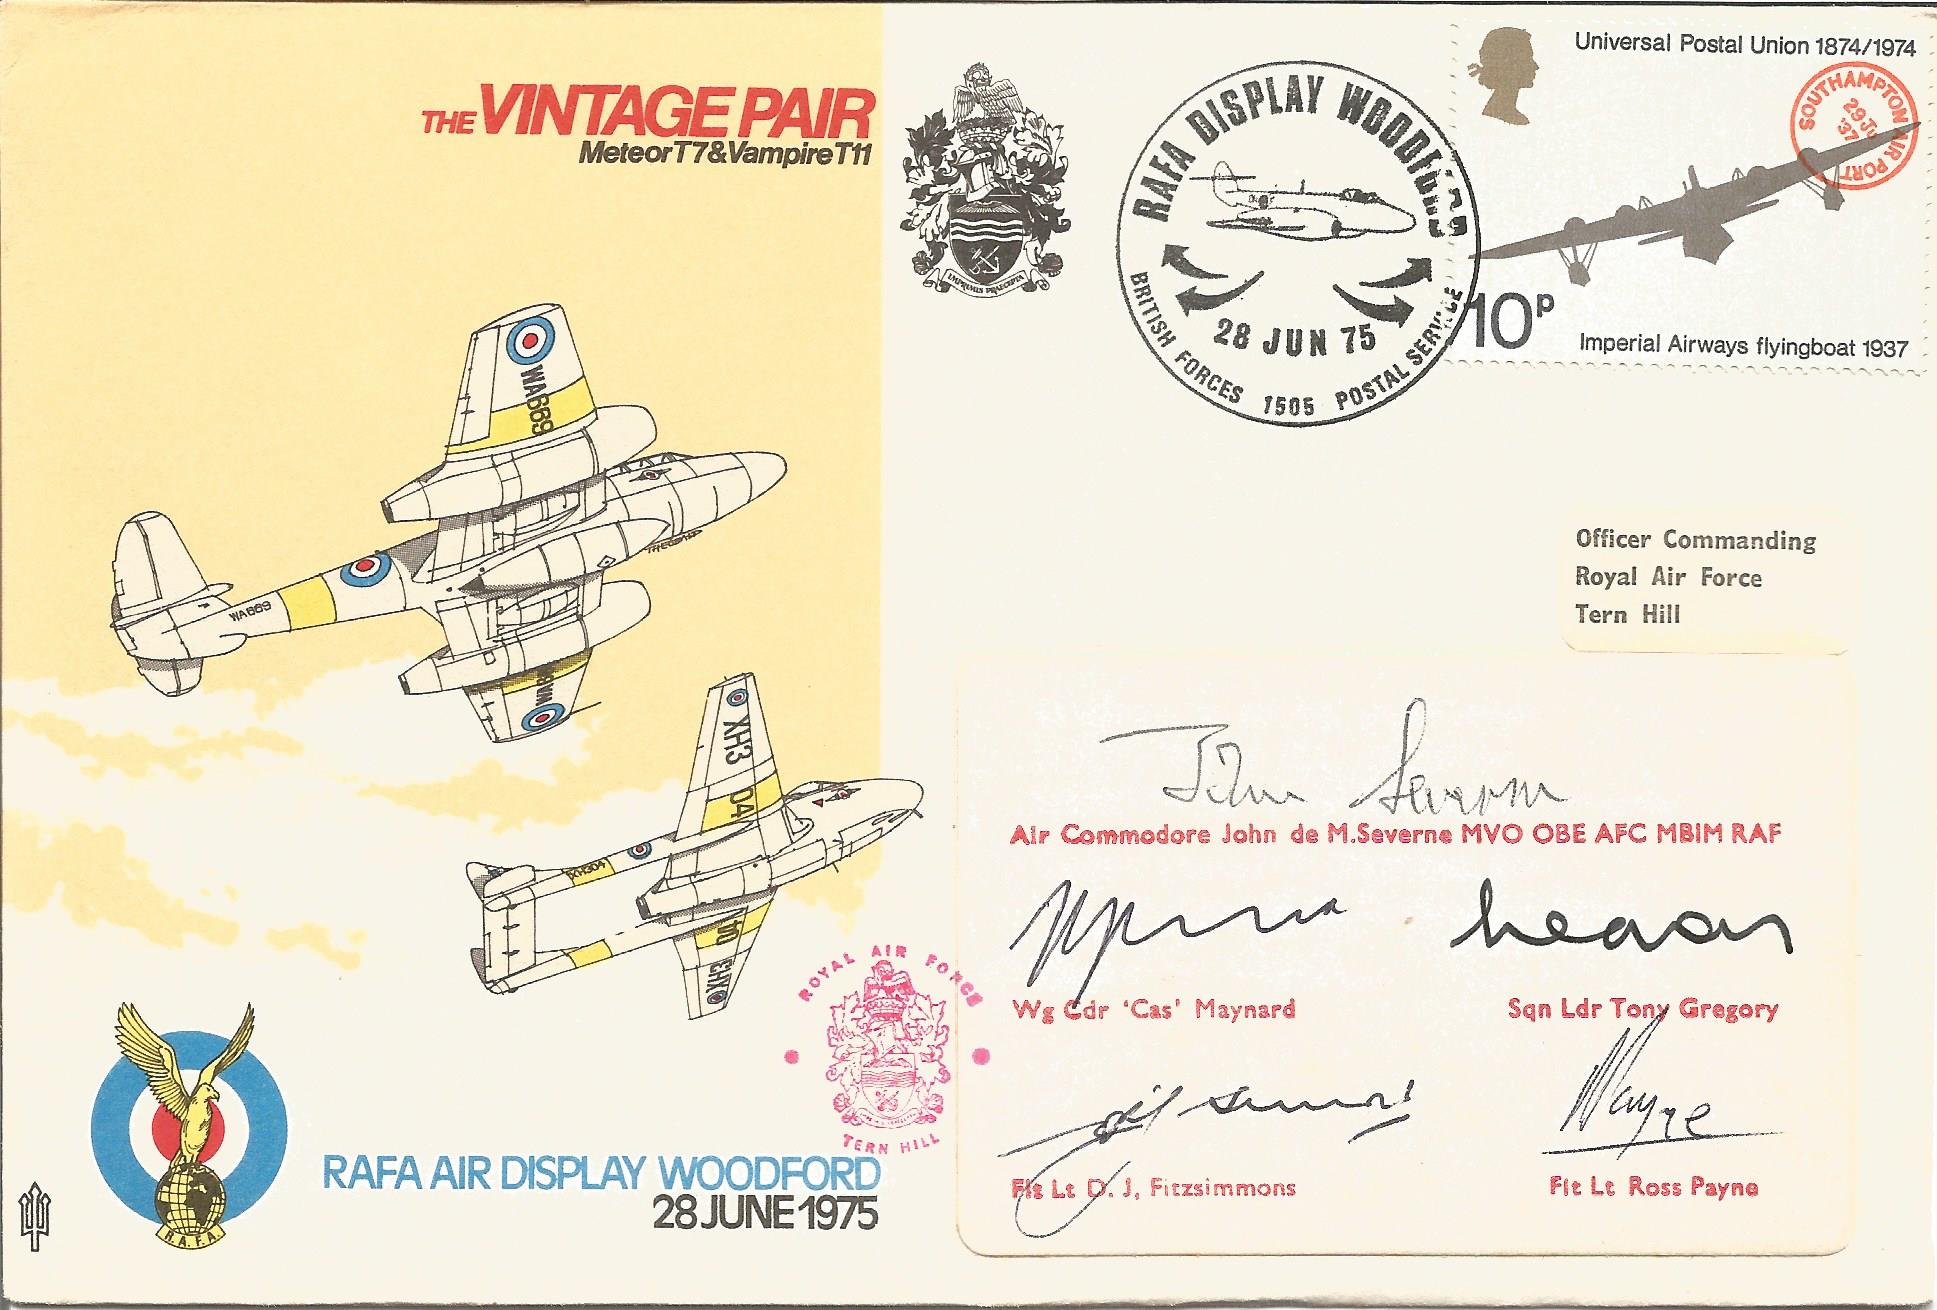 RAFA Air Display Woodford, The Vintage Pair cover signed by Air Commodore John De M Severne, Wg